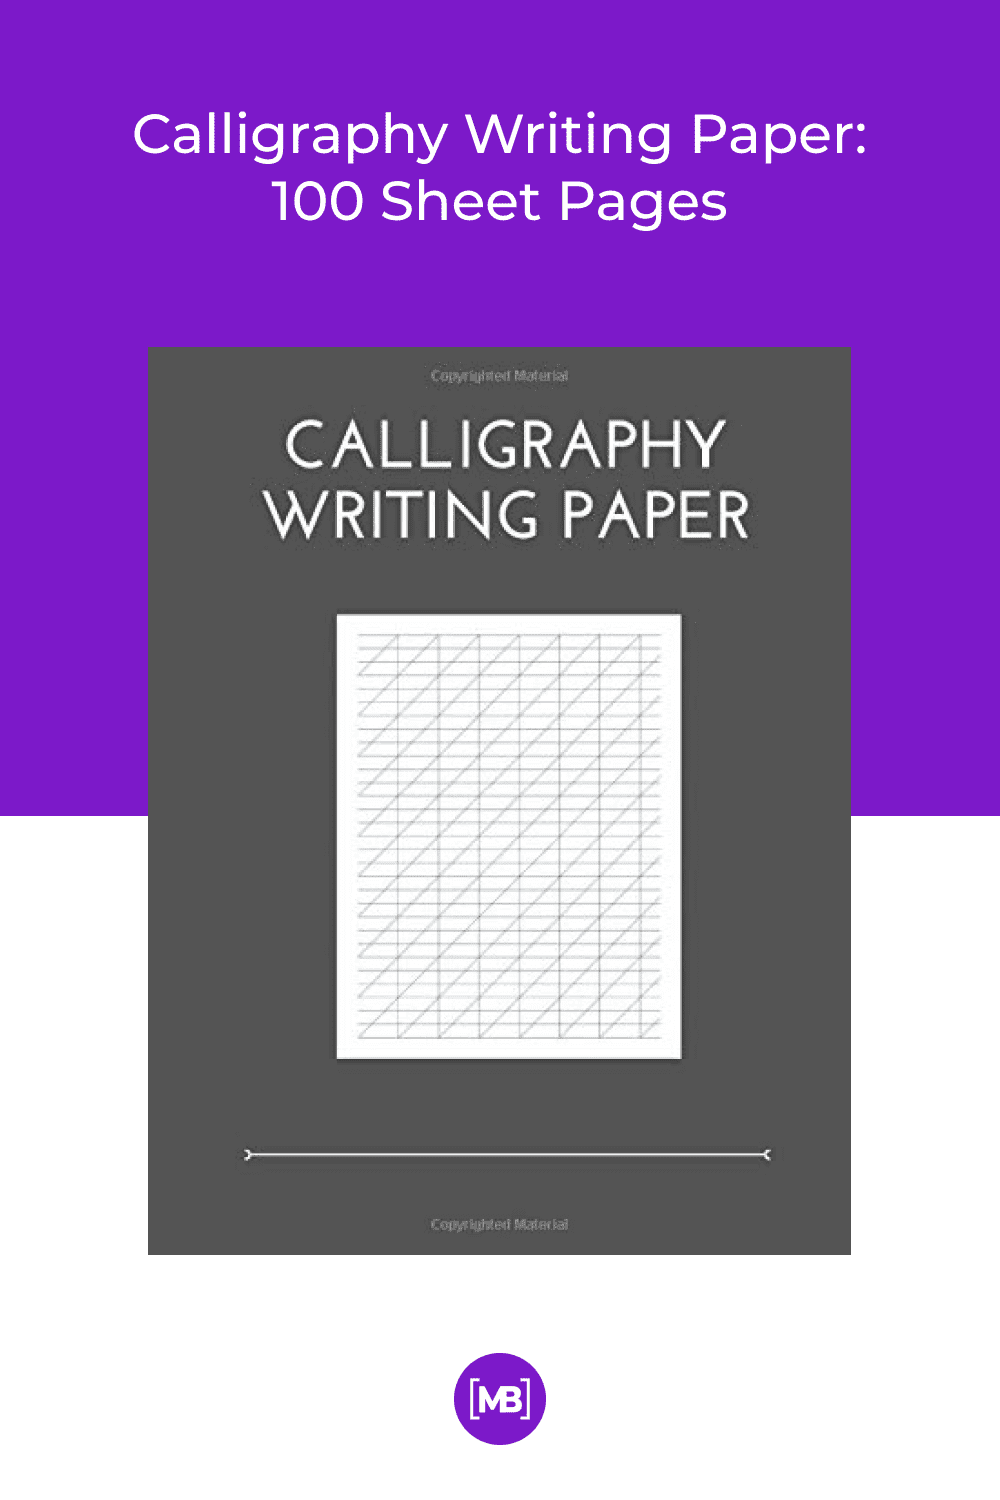 Now calligraphers can build their skill by practicing lettering on this artist-grade pad of calligraphy paper.